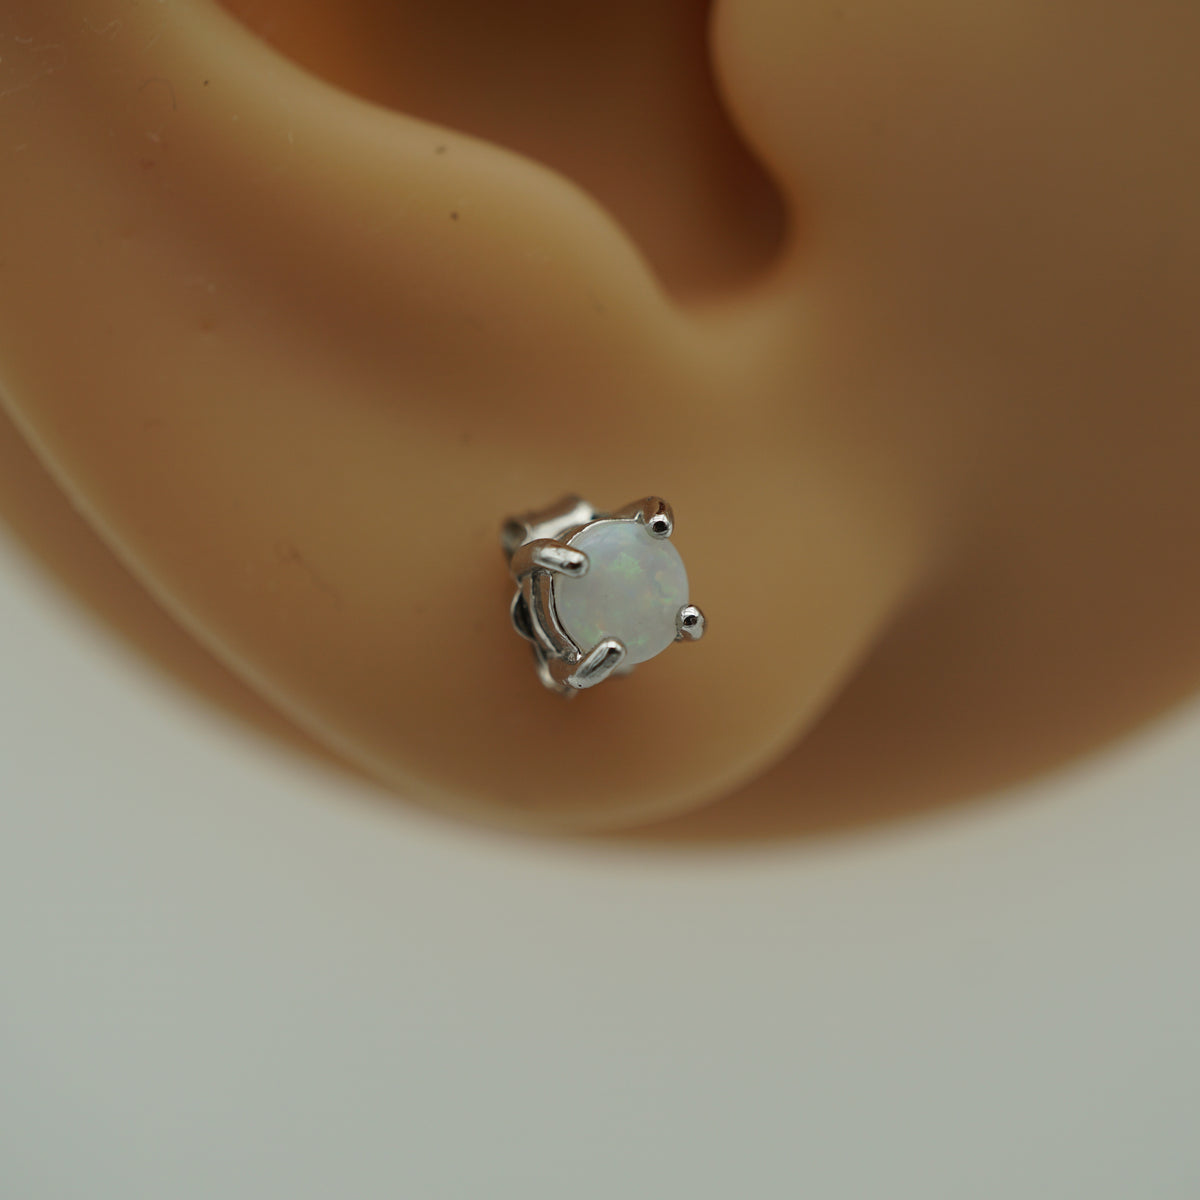 Tiny Silver Solid Round Oval Earrings, Opal minimalist studs, Silver earrings, Dainty Earrings, Small Stud Earrings, Stud Earrings-Vsabel Jewellery